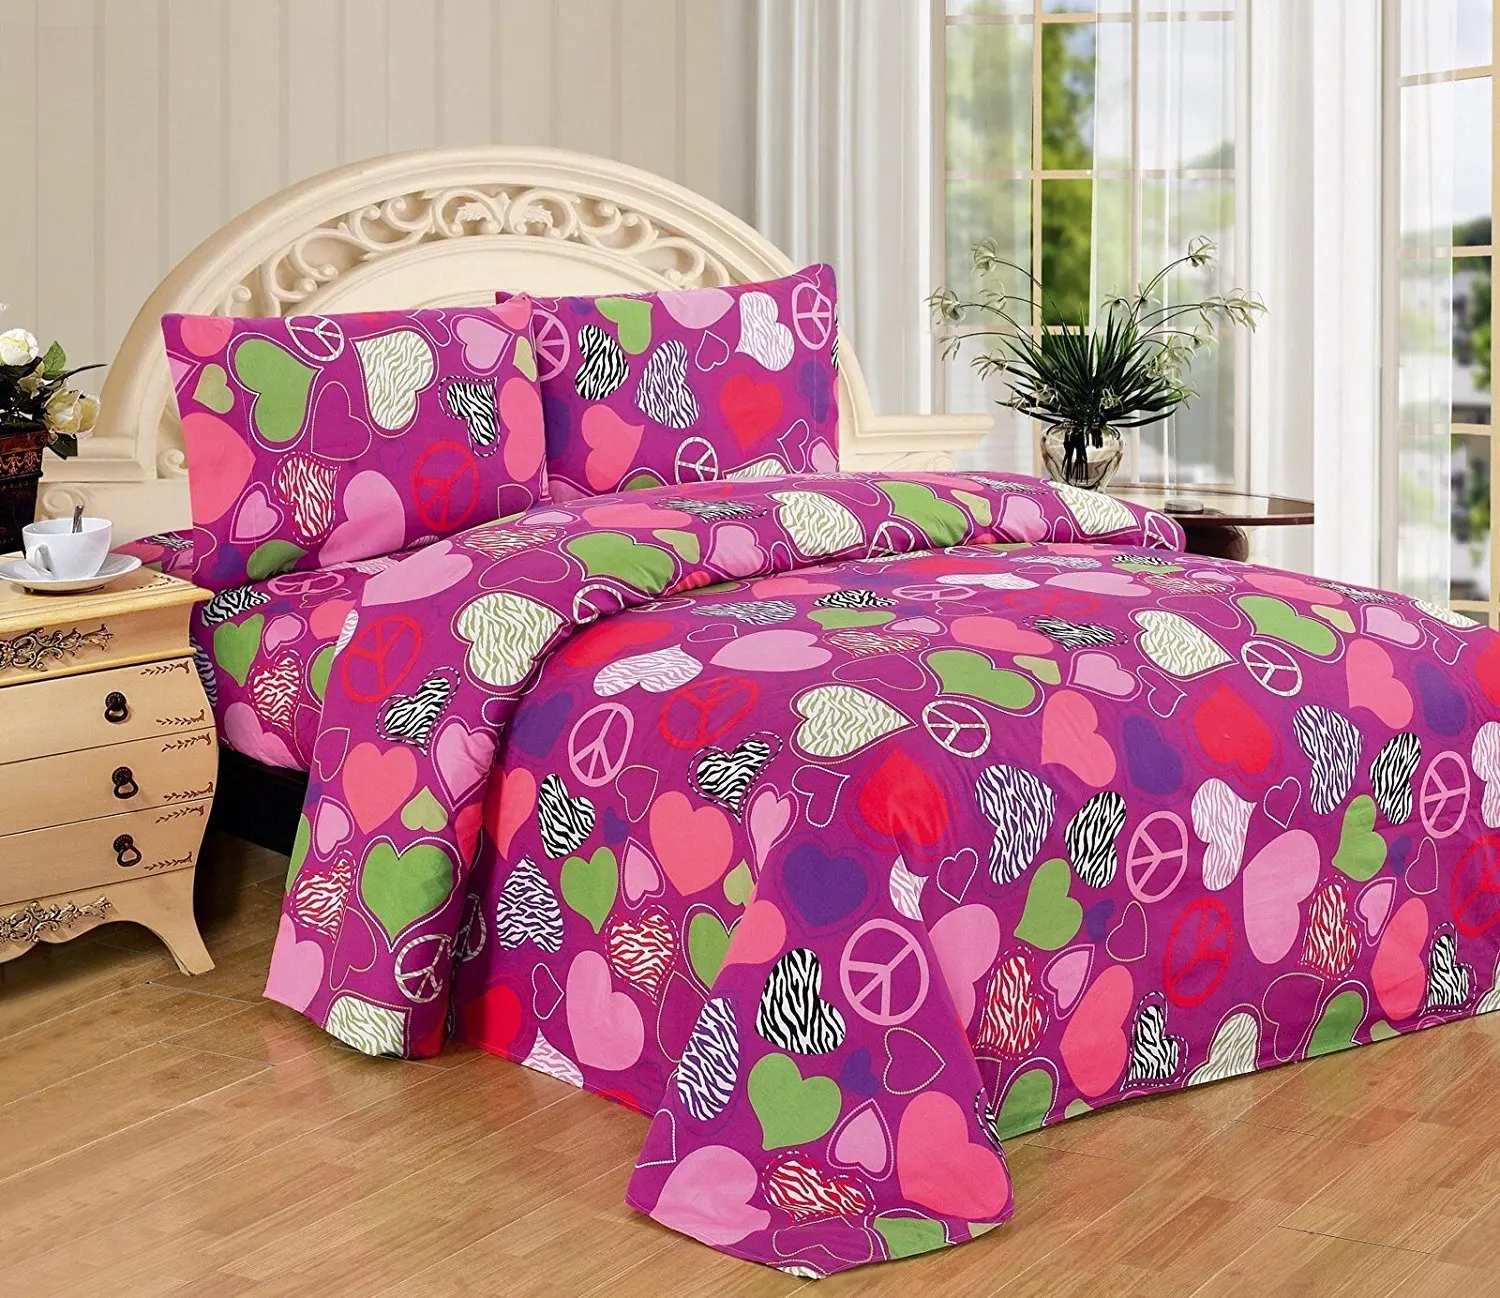 MK Home Mk Collection 3pc Twin Sheet Set Hearts Peace Signs Zebra Hot Pink Purple Green White Black Red Light Pink New